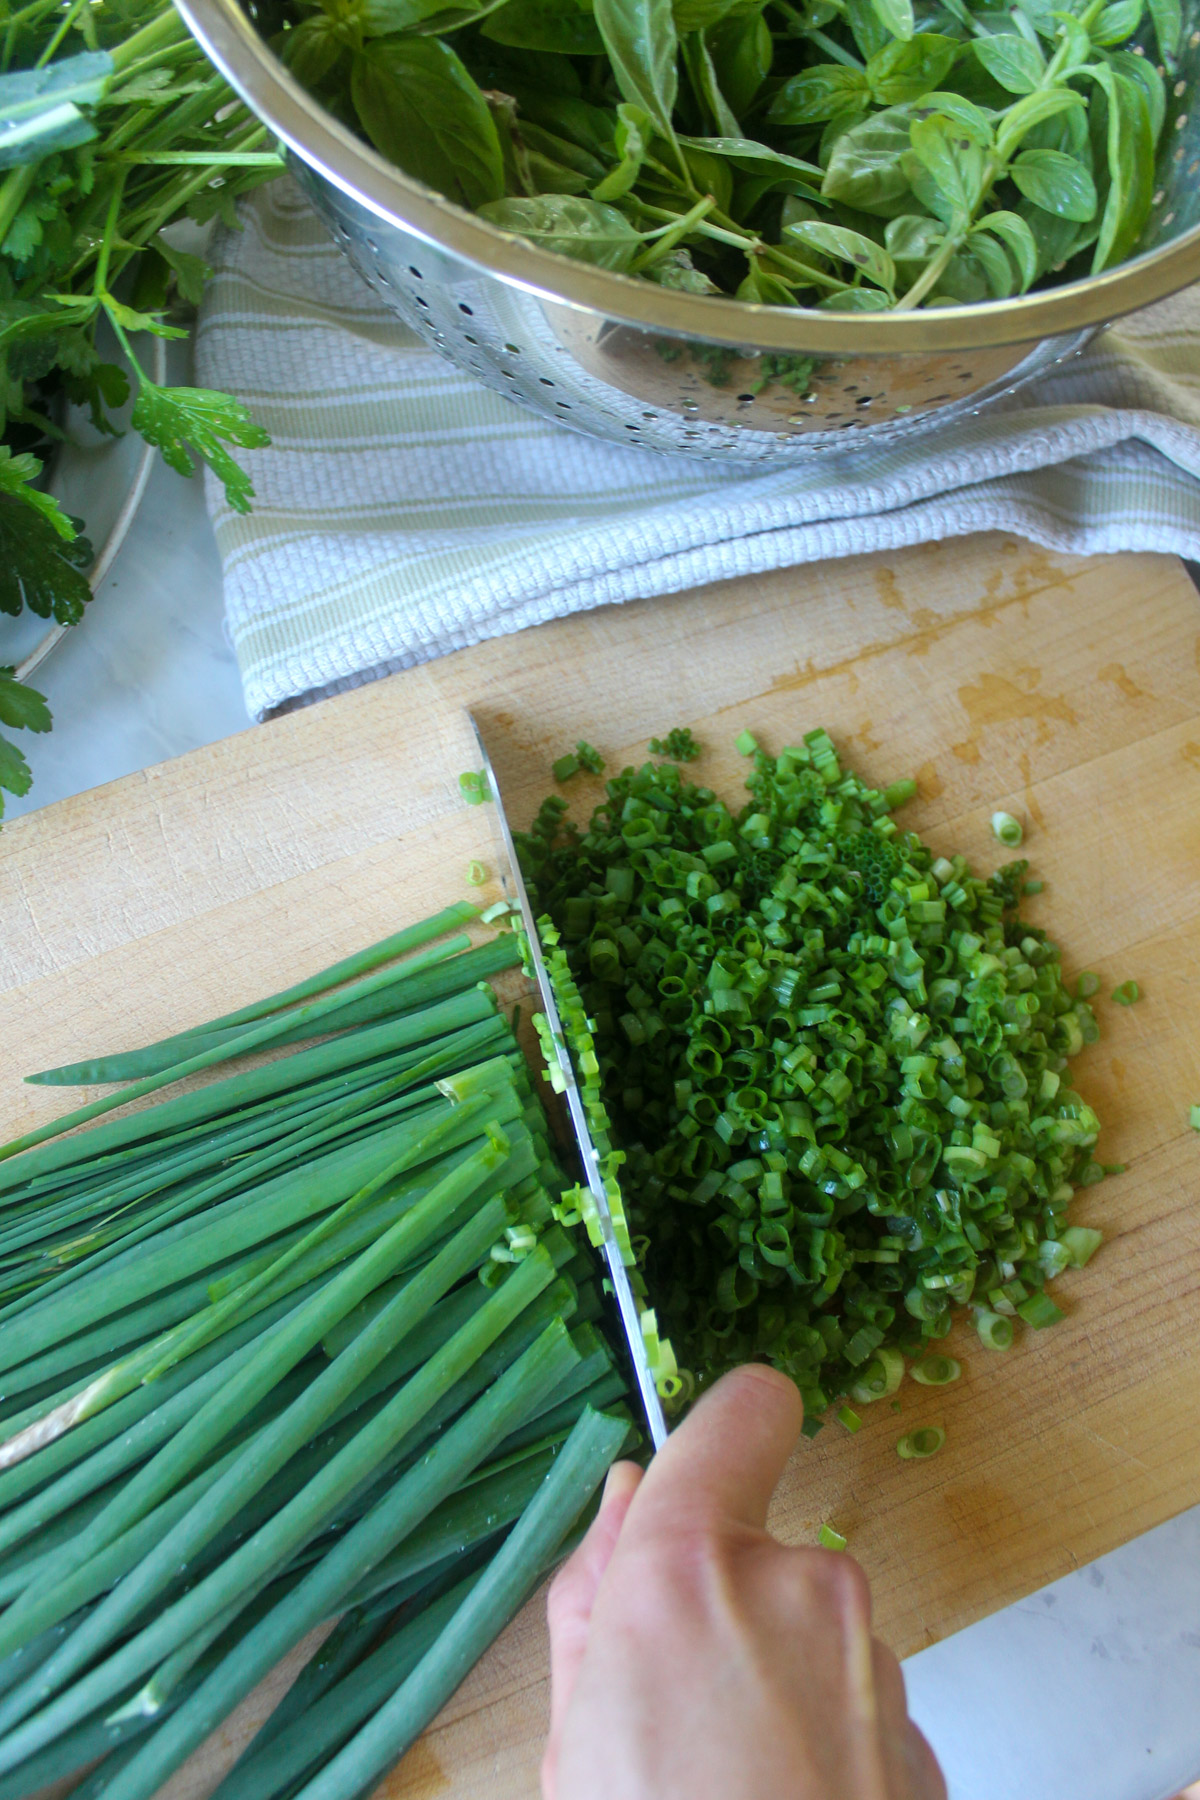 Chopping scallions and chives on a cutting board.